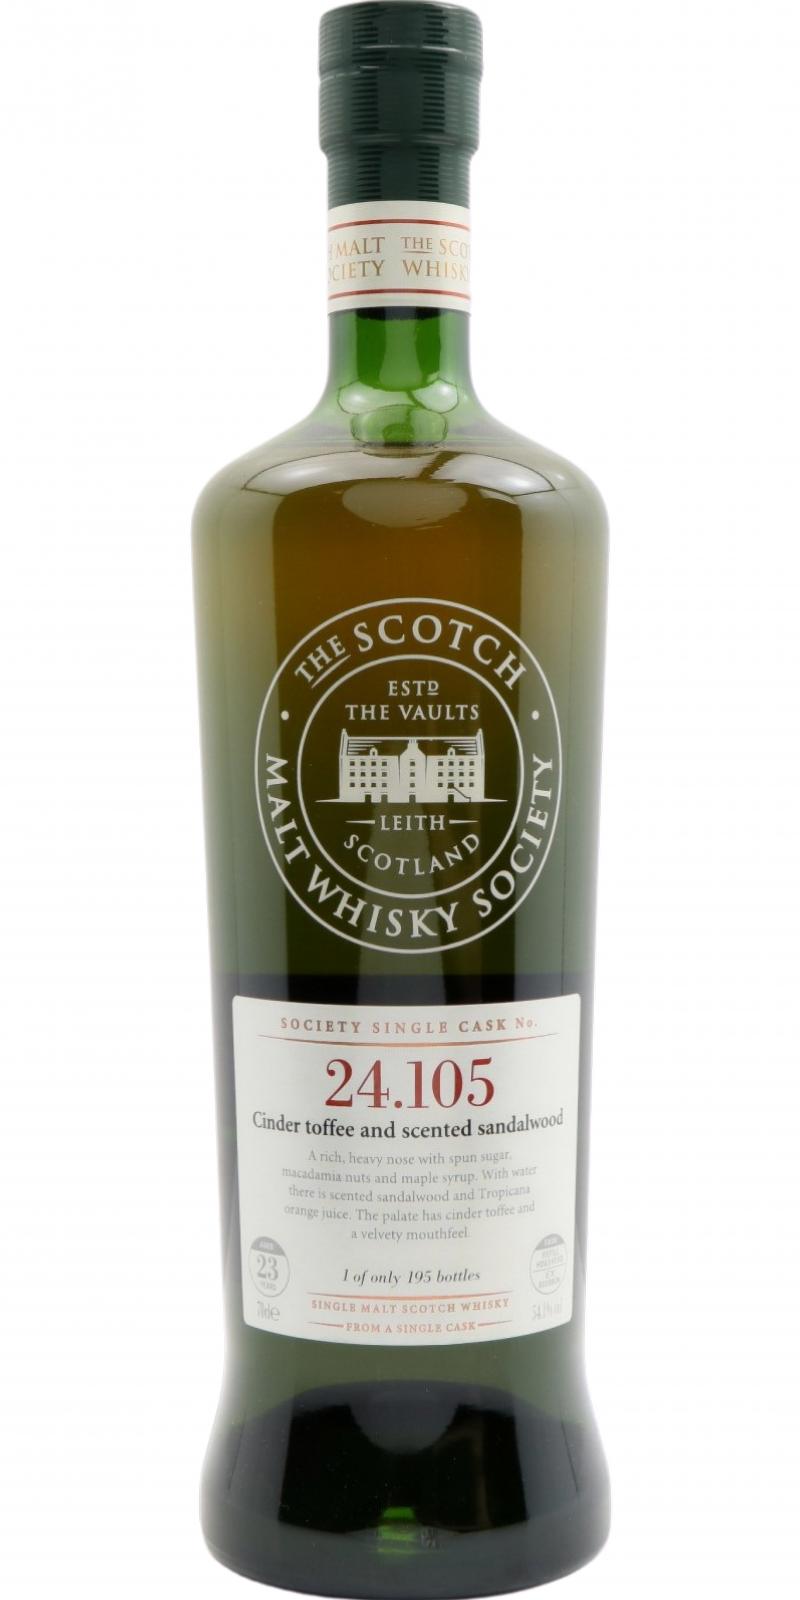 Macallan 1985 SMWS 24.105 Cinder toffee and scented sandalwood Refill Hogshead 24.105 54.1% 700ml